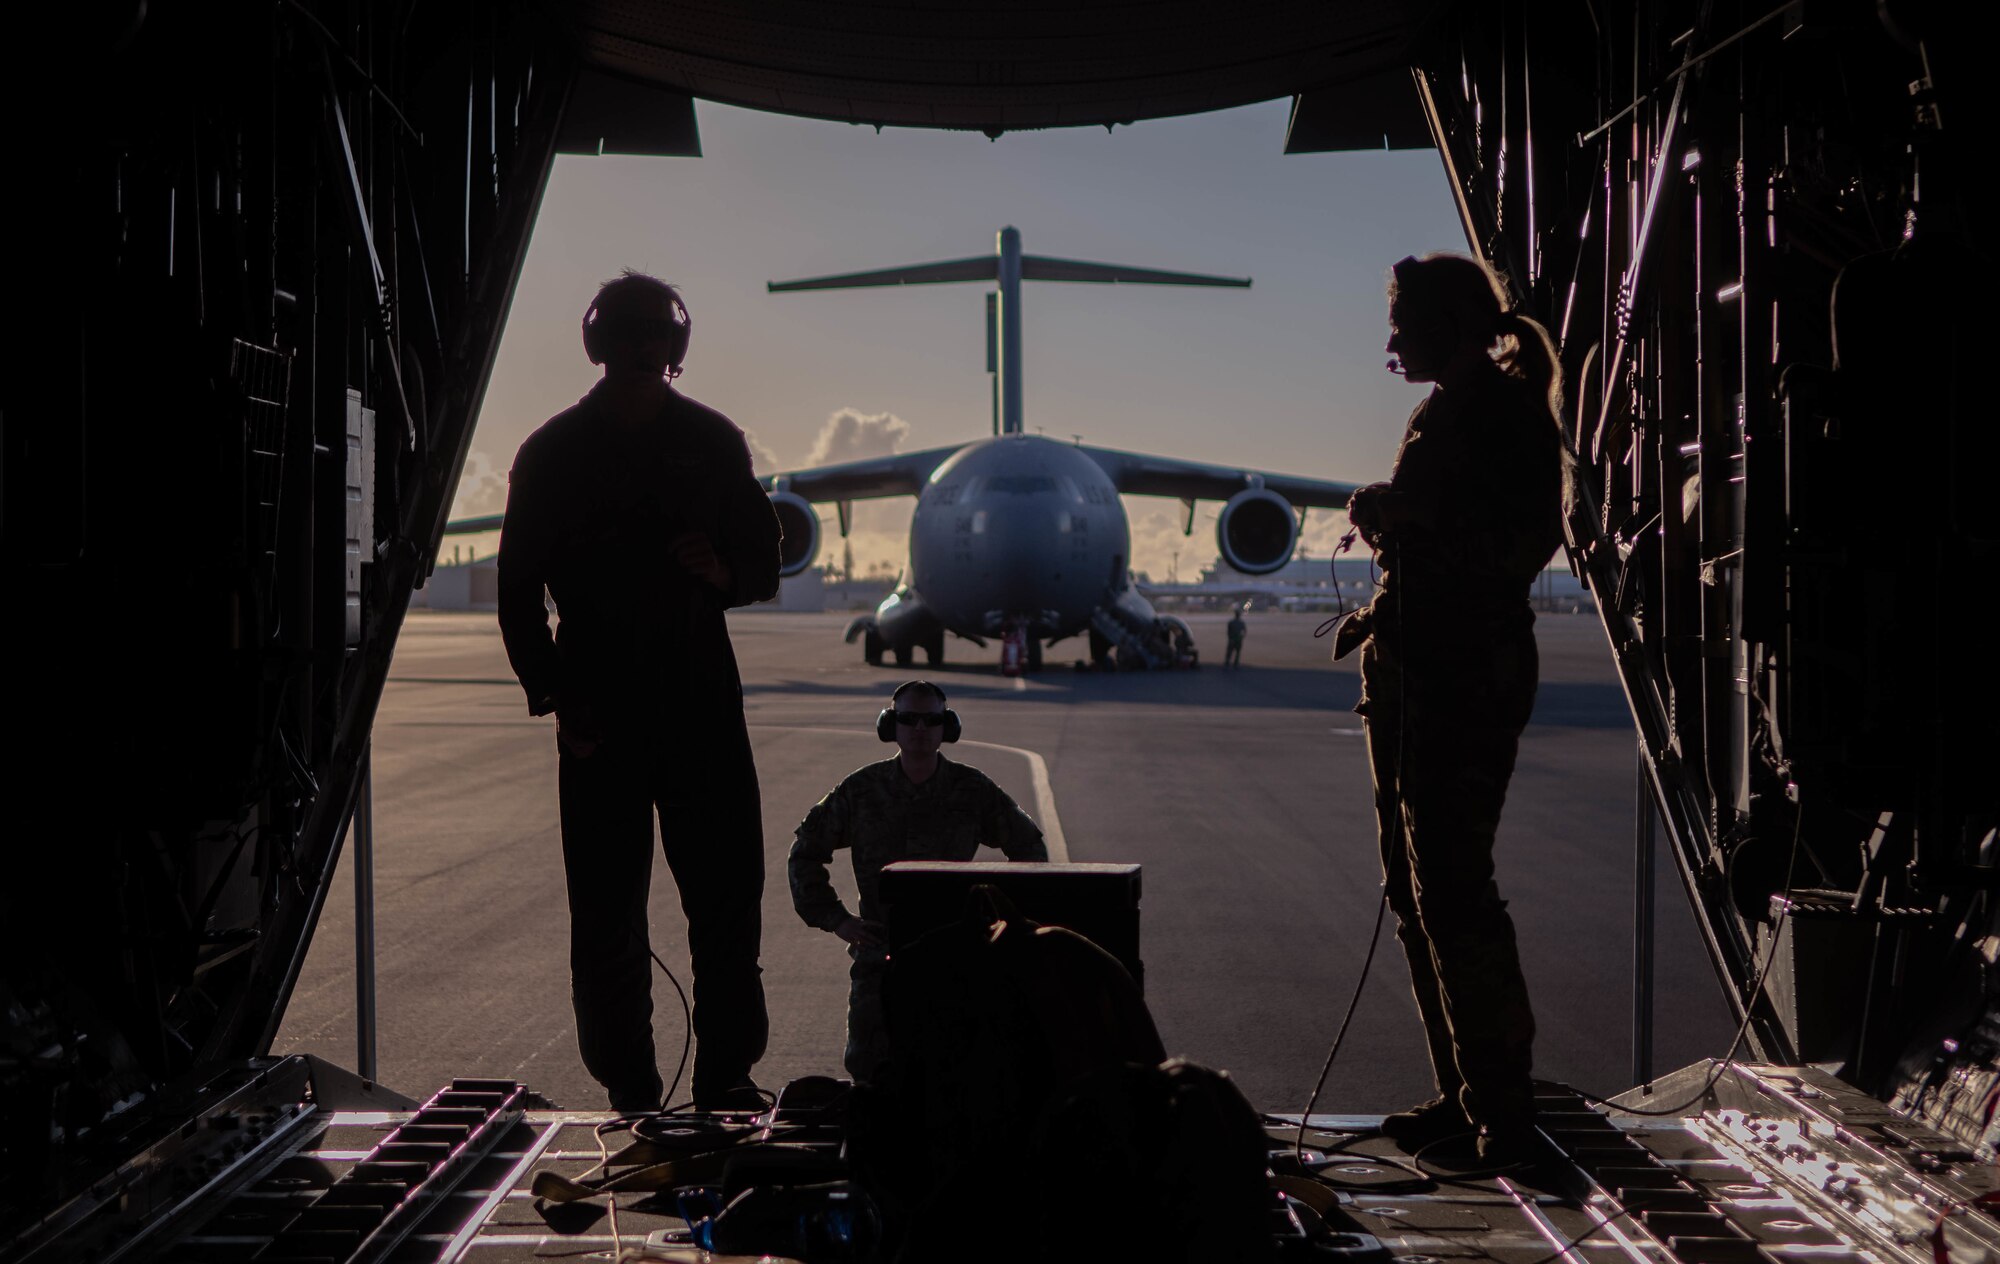 U.S. Air Force Senior Master Sgt. Chuck Davis, left, and Airman 1st Class Skye Luck, Nevada Air National Guard loadmasters, at the ramp of a Nevada C-130 Hercules Aircraft after completing a training mission at Hickam Air Force Base, Hawaii, March 2, 2022. Airmen from various squadrons and groups from the Nevada Air National Guard participated in an exercise to employ the agile combat employment concept across various Hawaiian Islands.